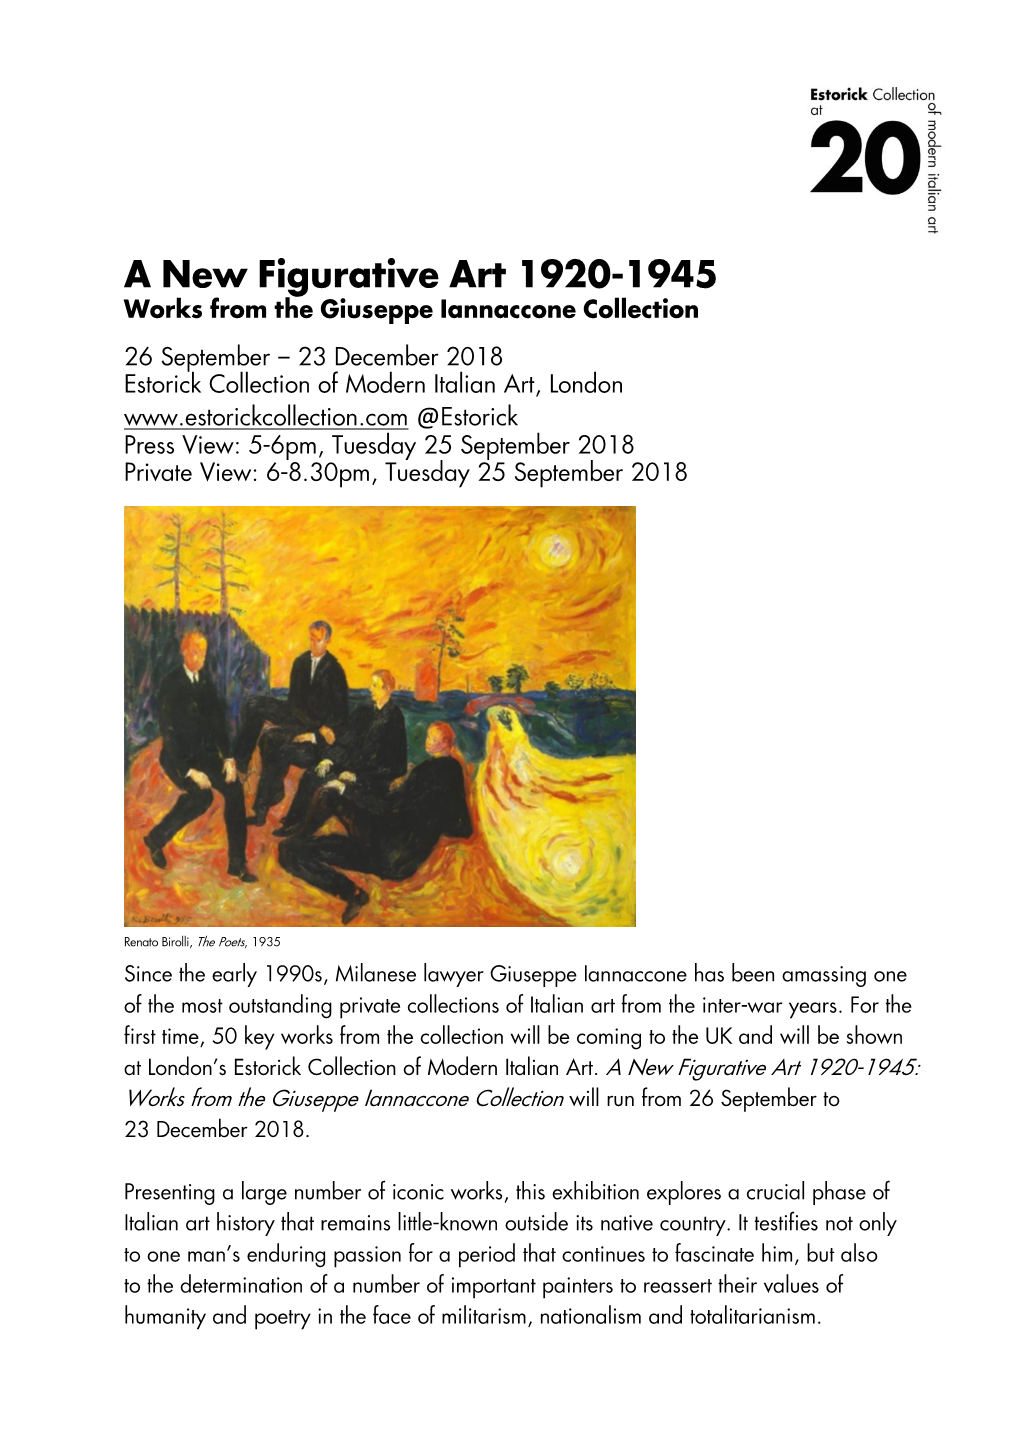 A New Figurative Art 1920-1945 Works from the Giuseppe Iannaccone Collection